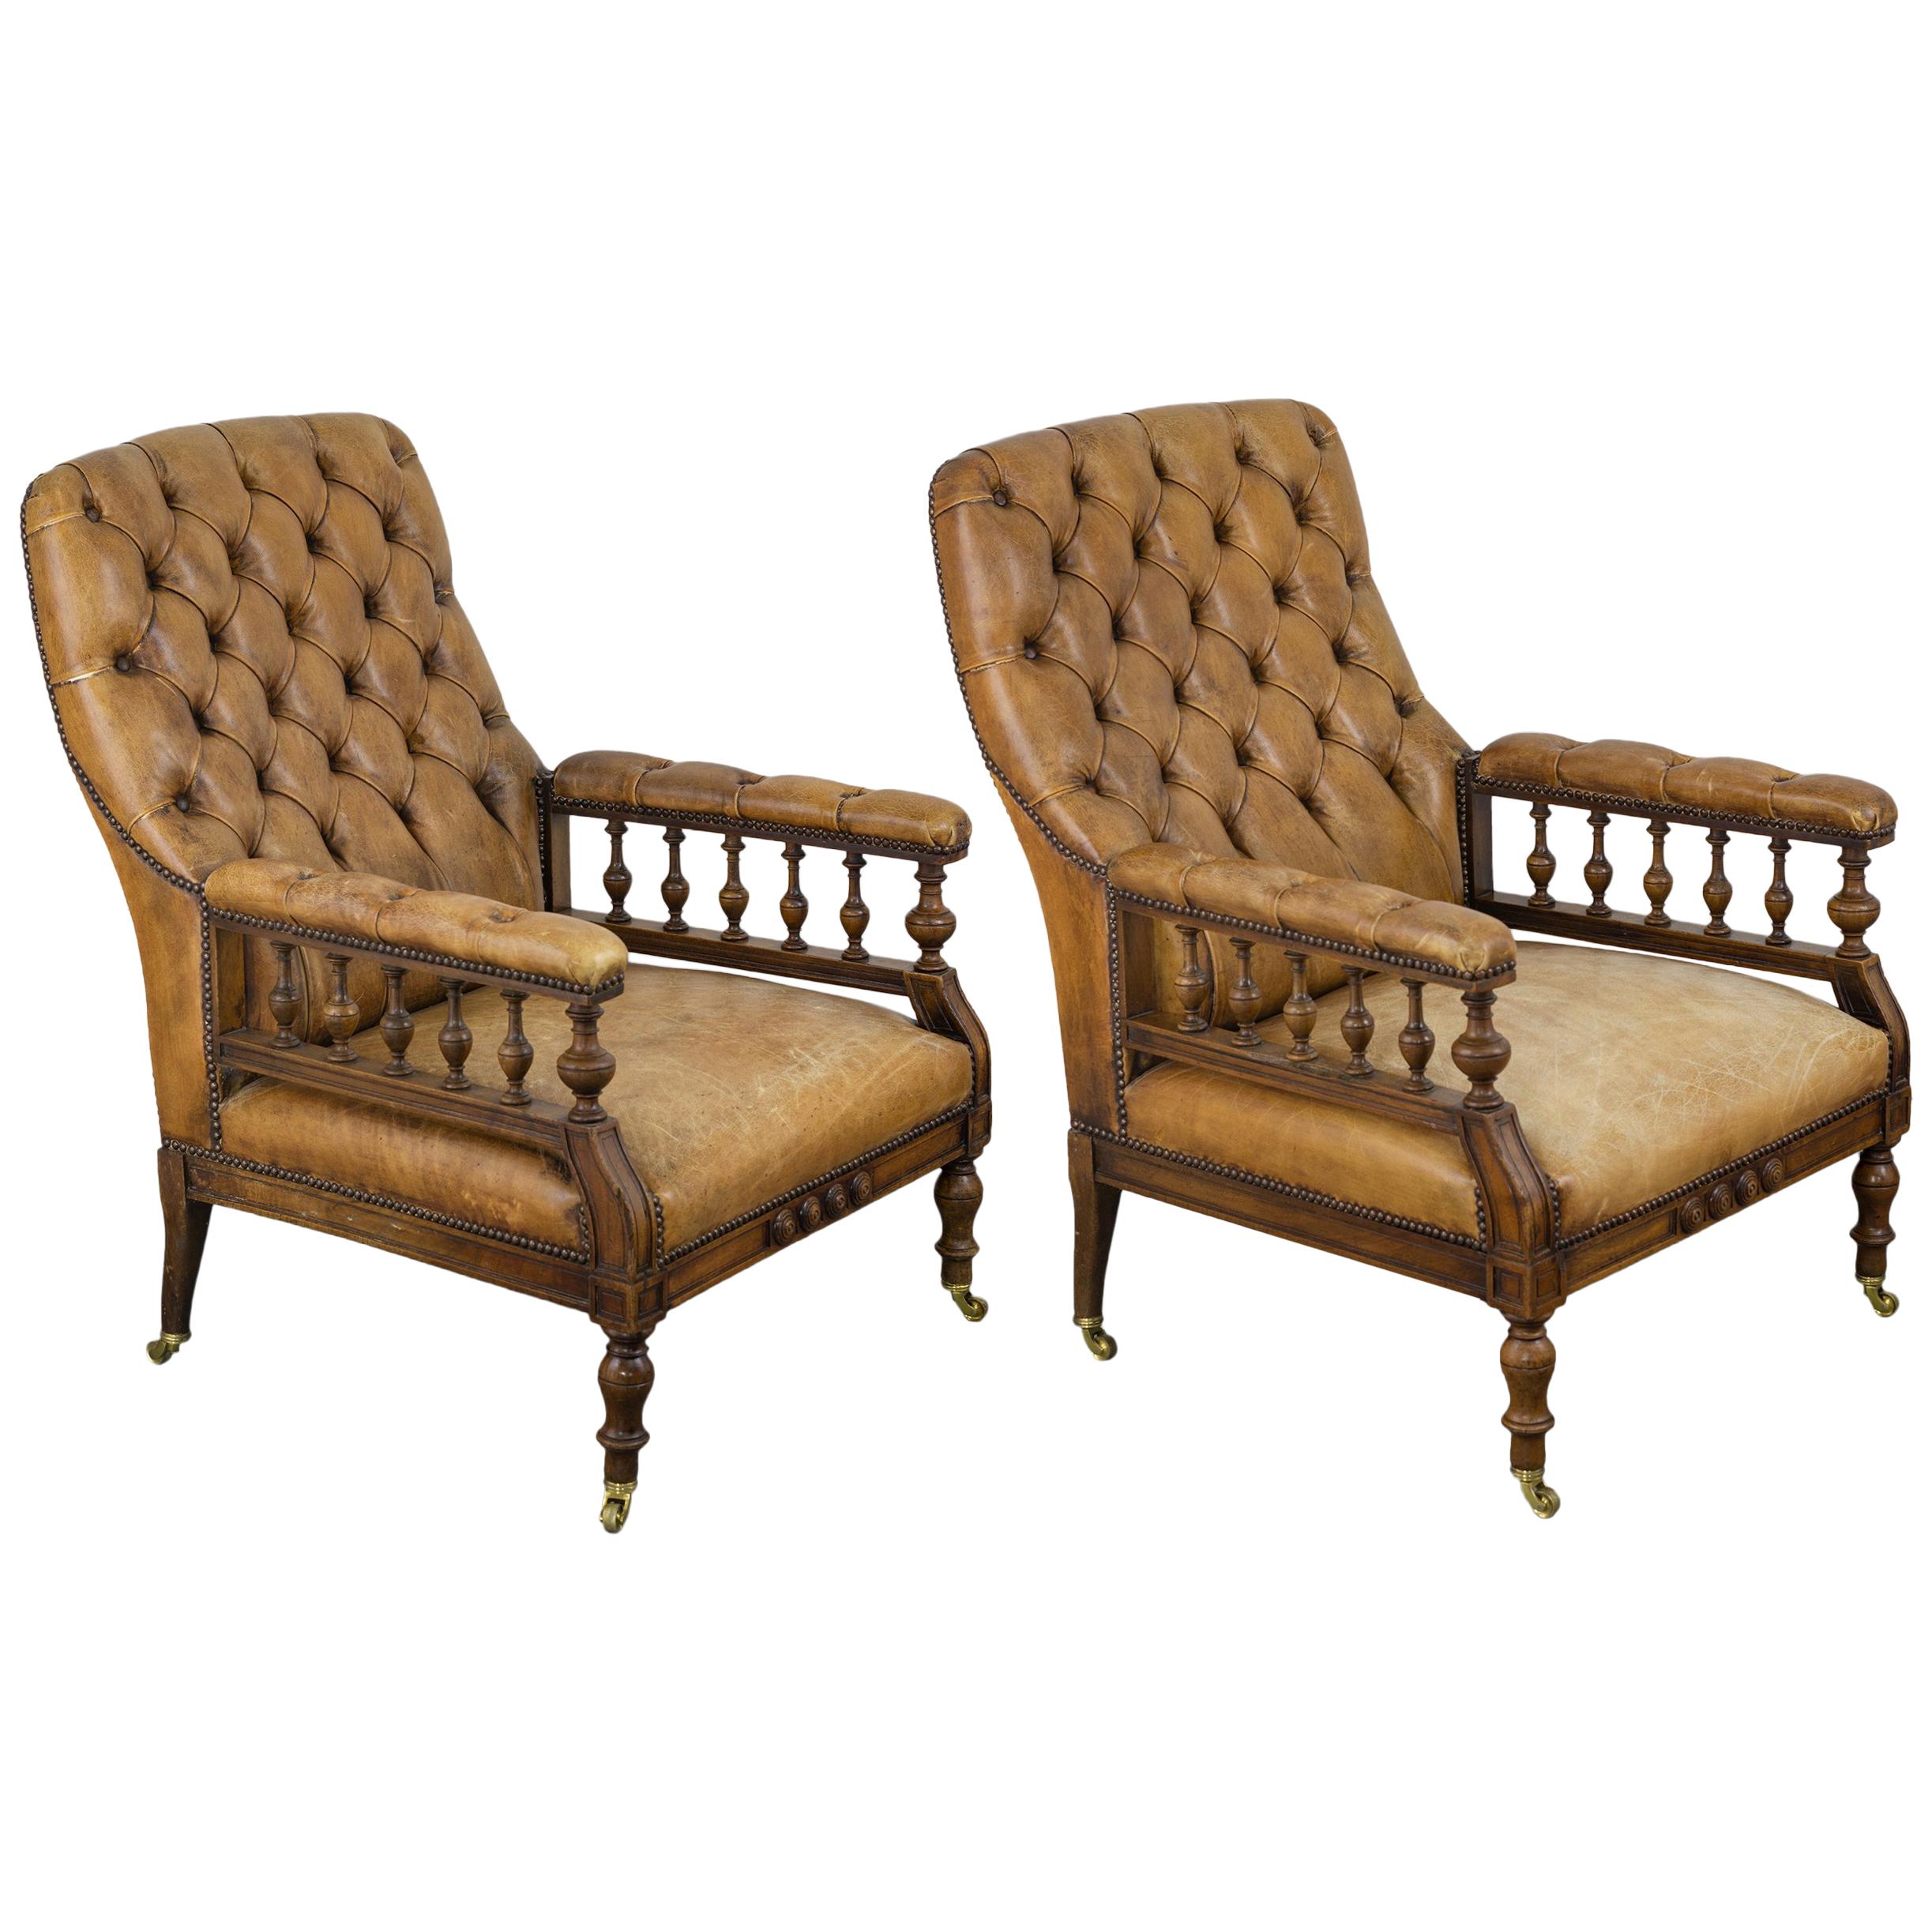 Pair of William IV Leather Parlor Chairs